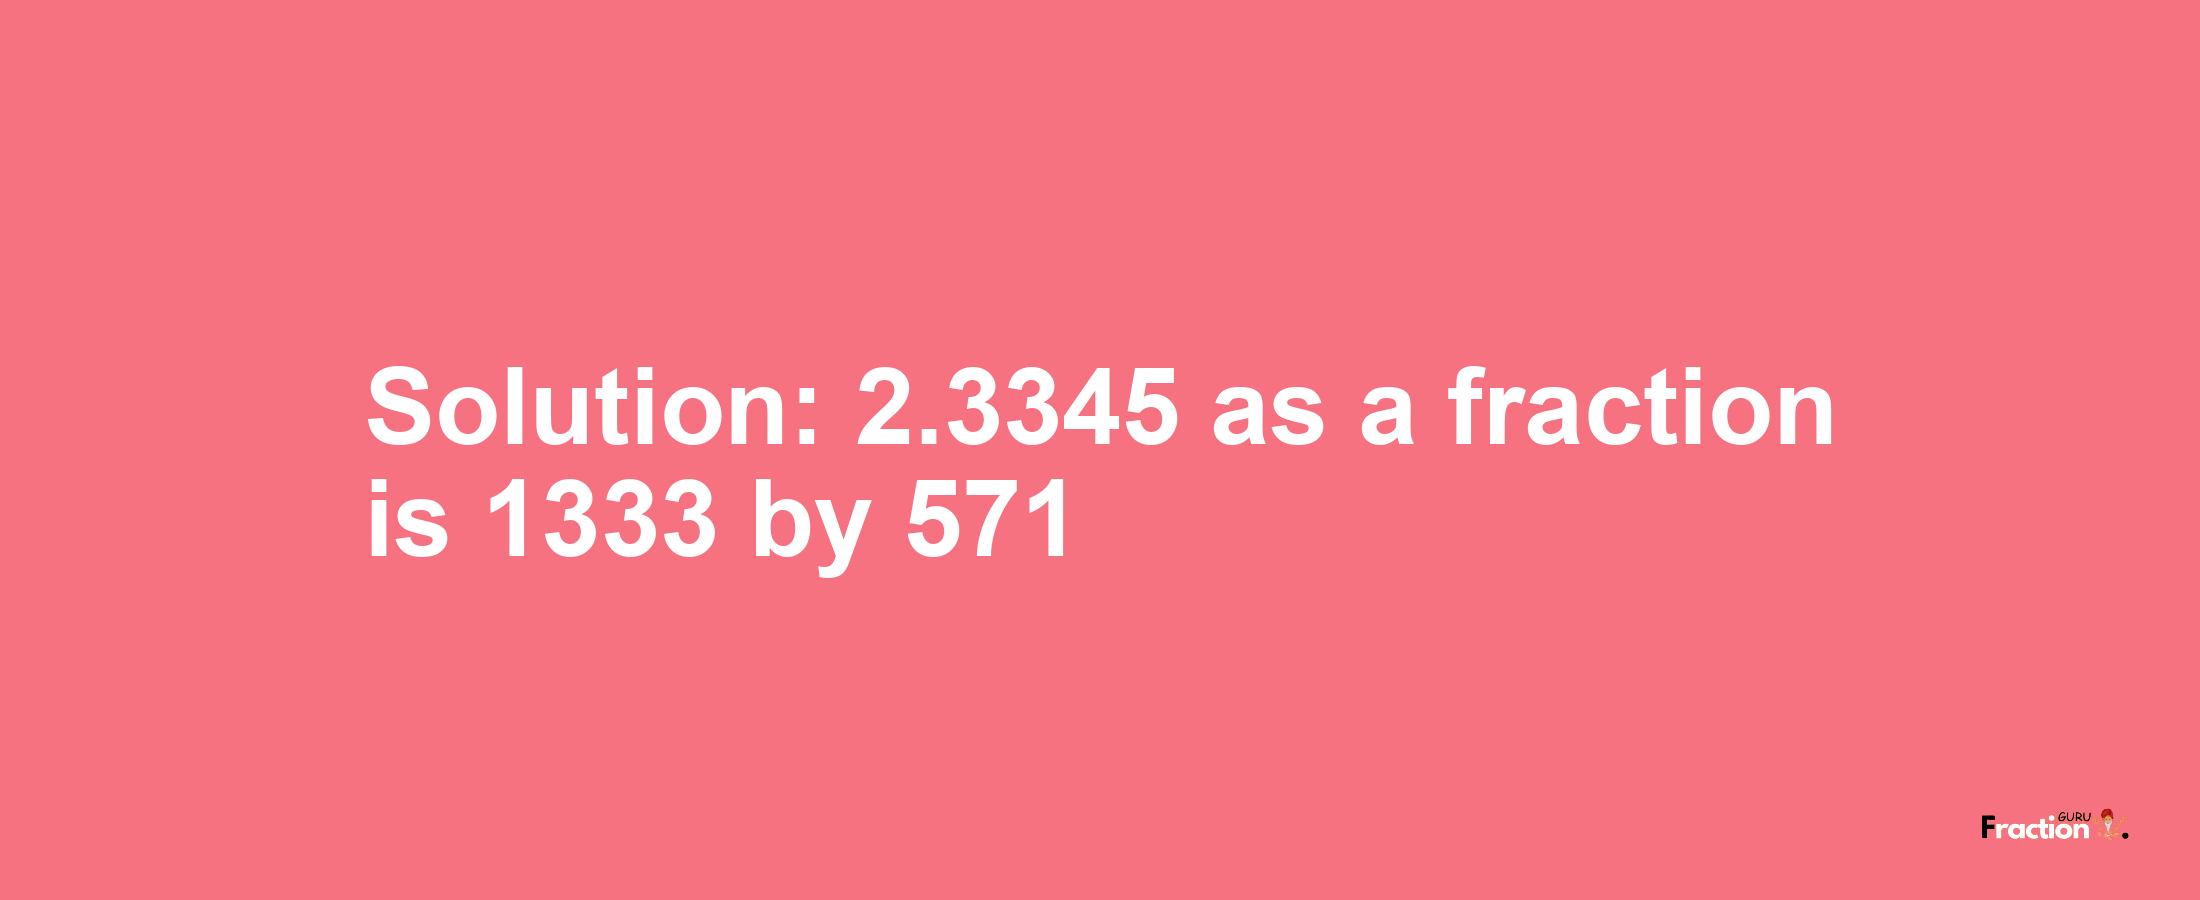 Solution:2.3345 as a fraction is 1333/571